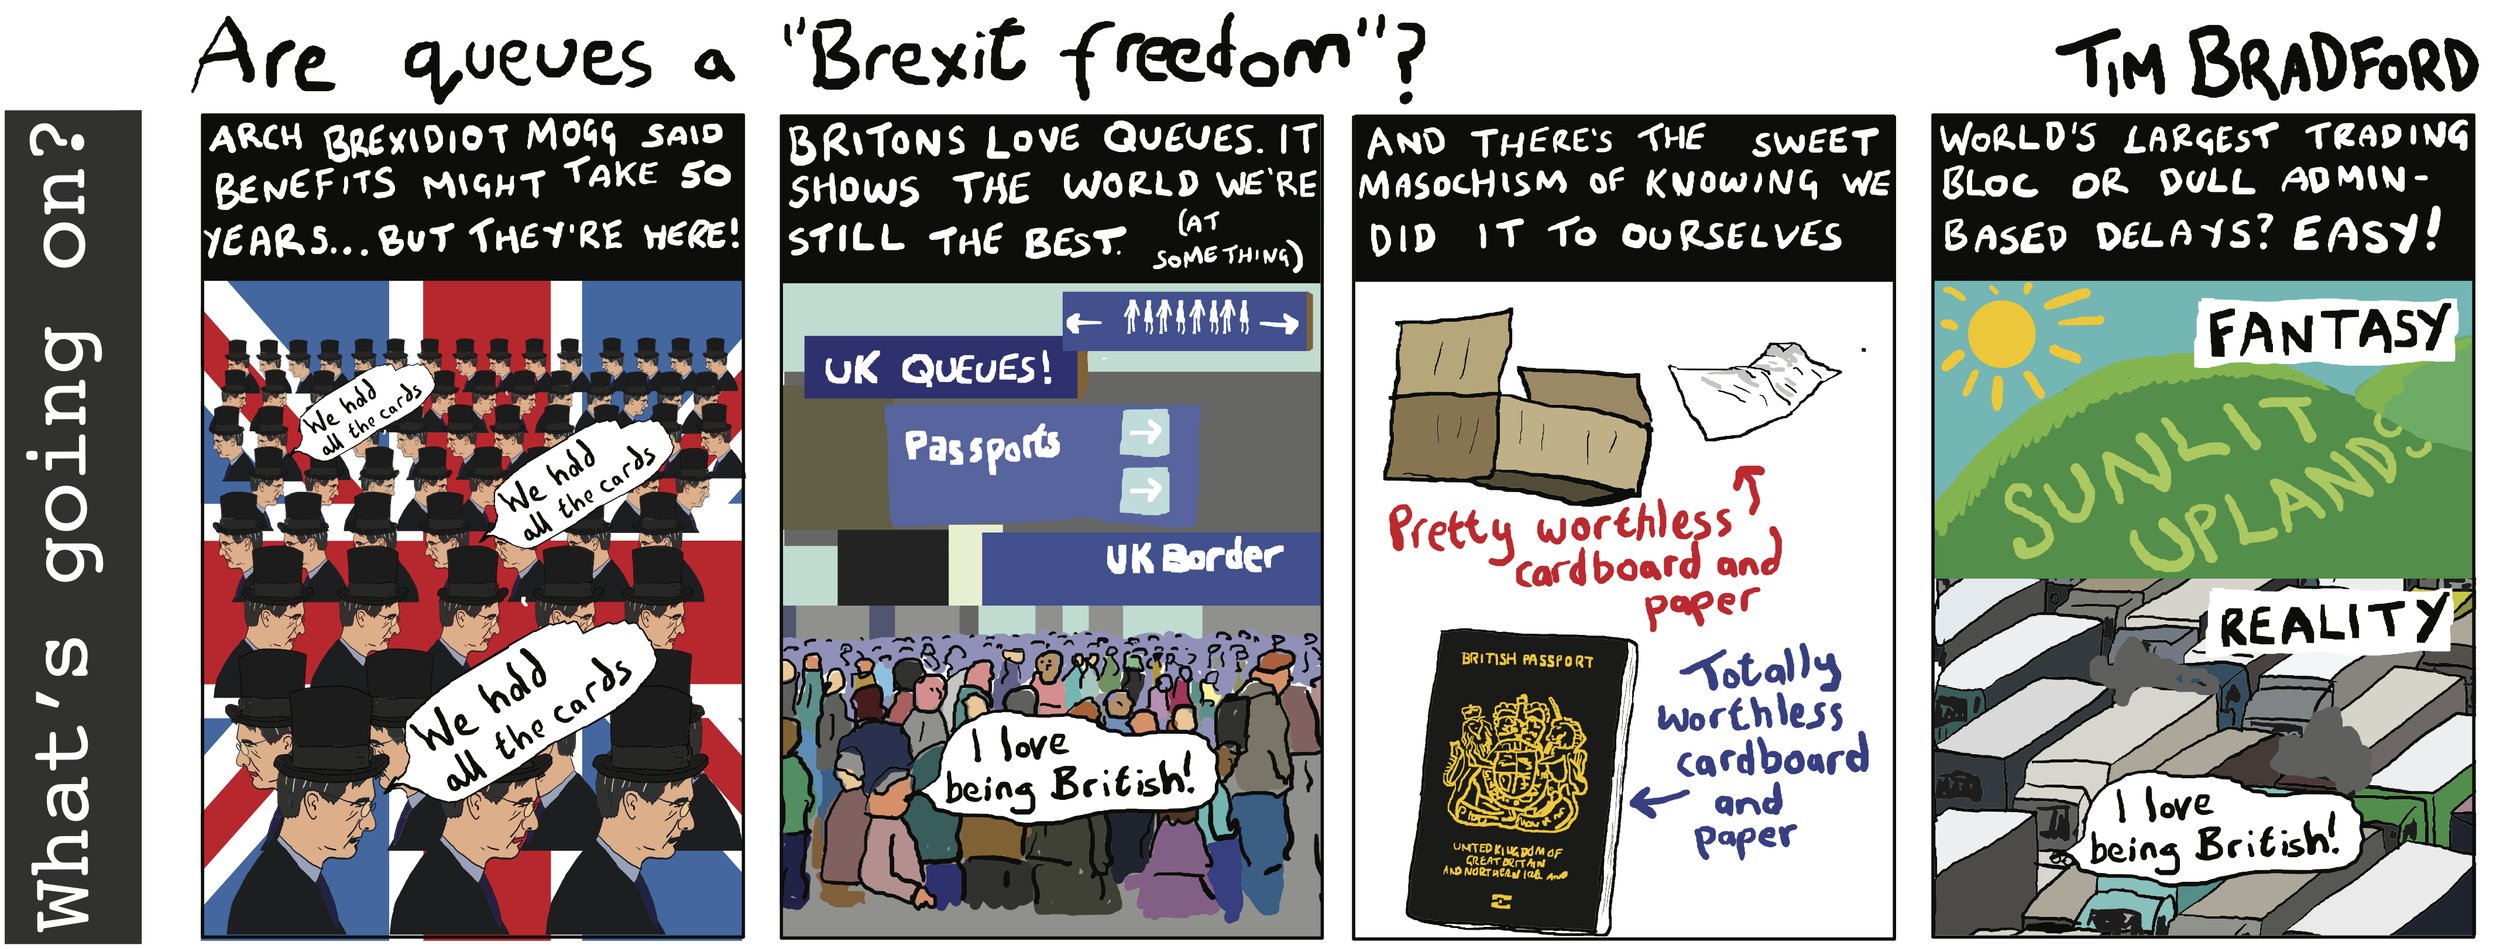 Are queues a "Brexit freedom"? - 29/01/2024